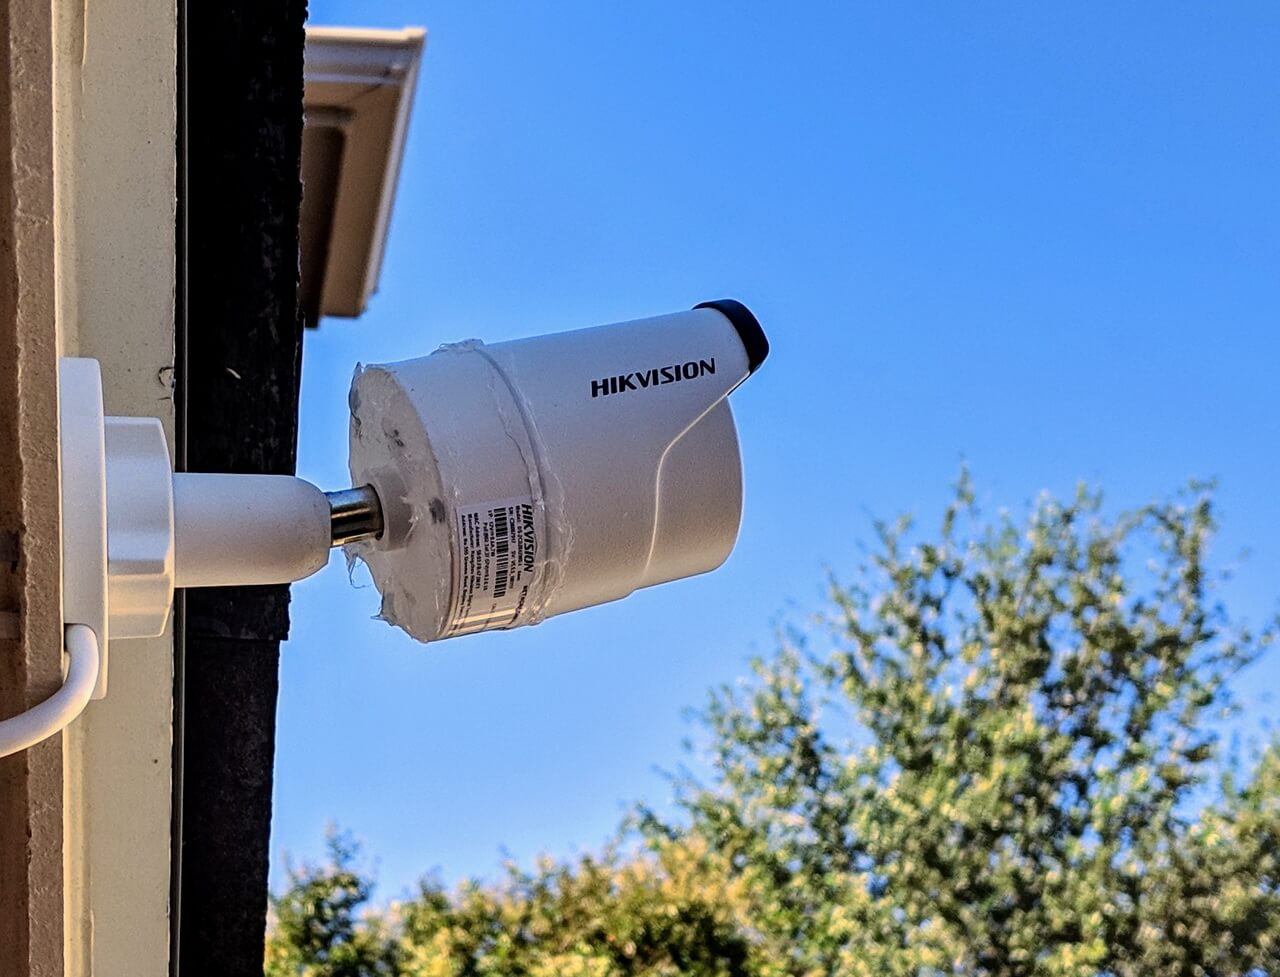 Actual photo of Hikvision sky and weather camera